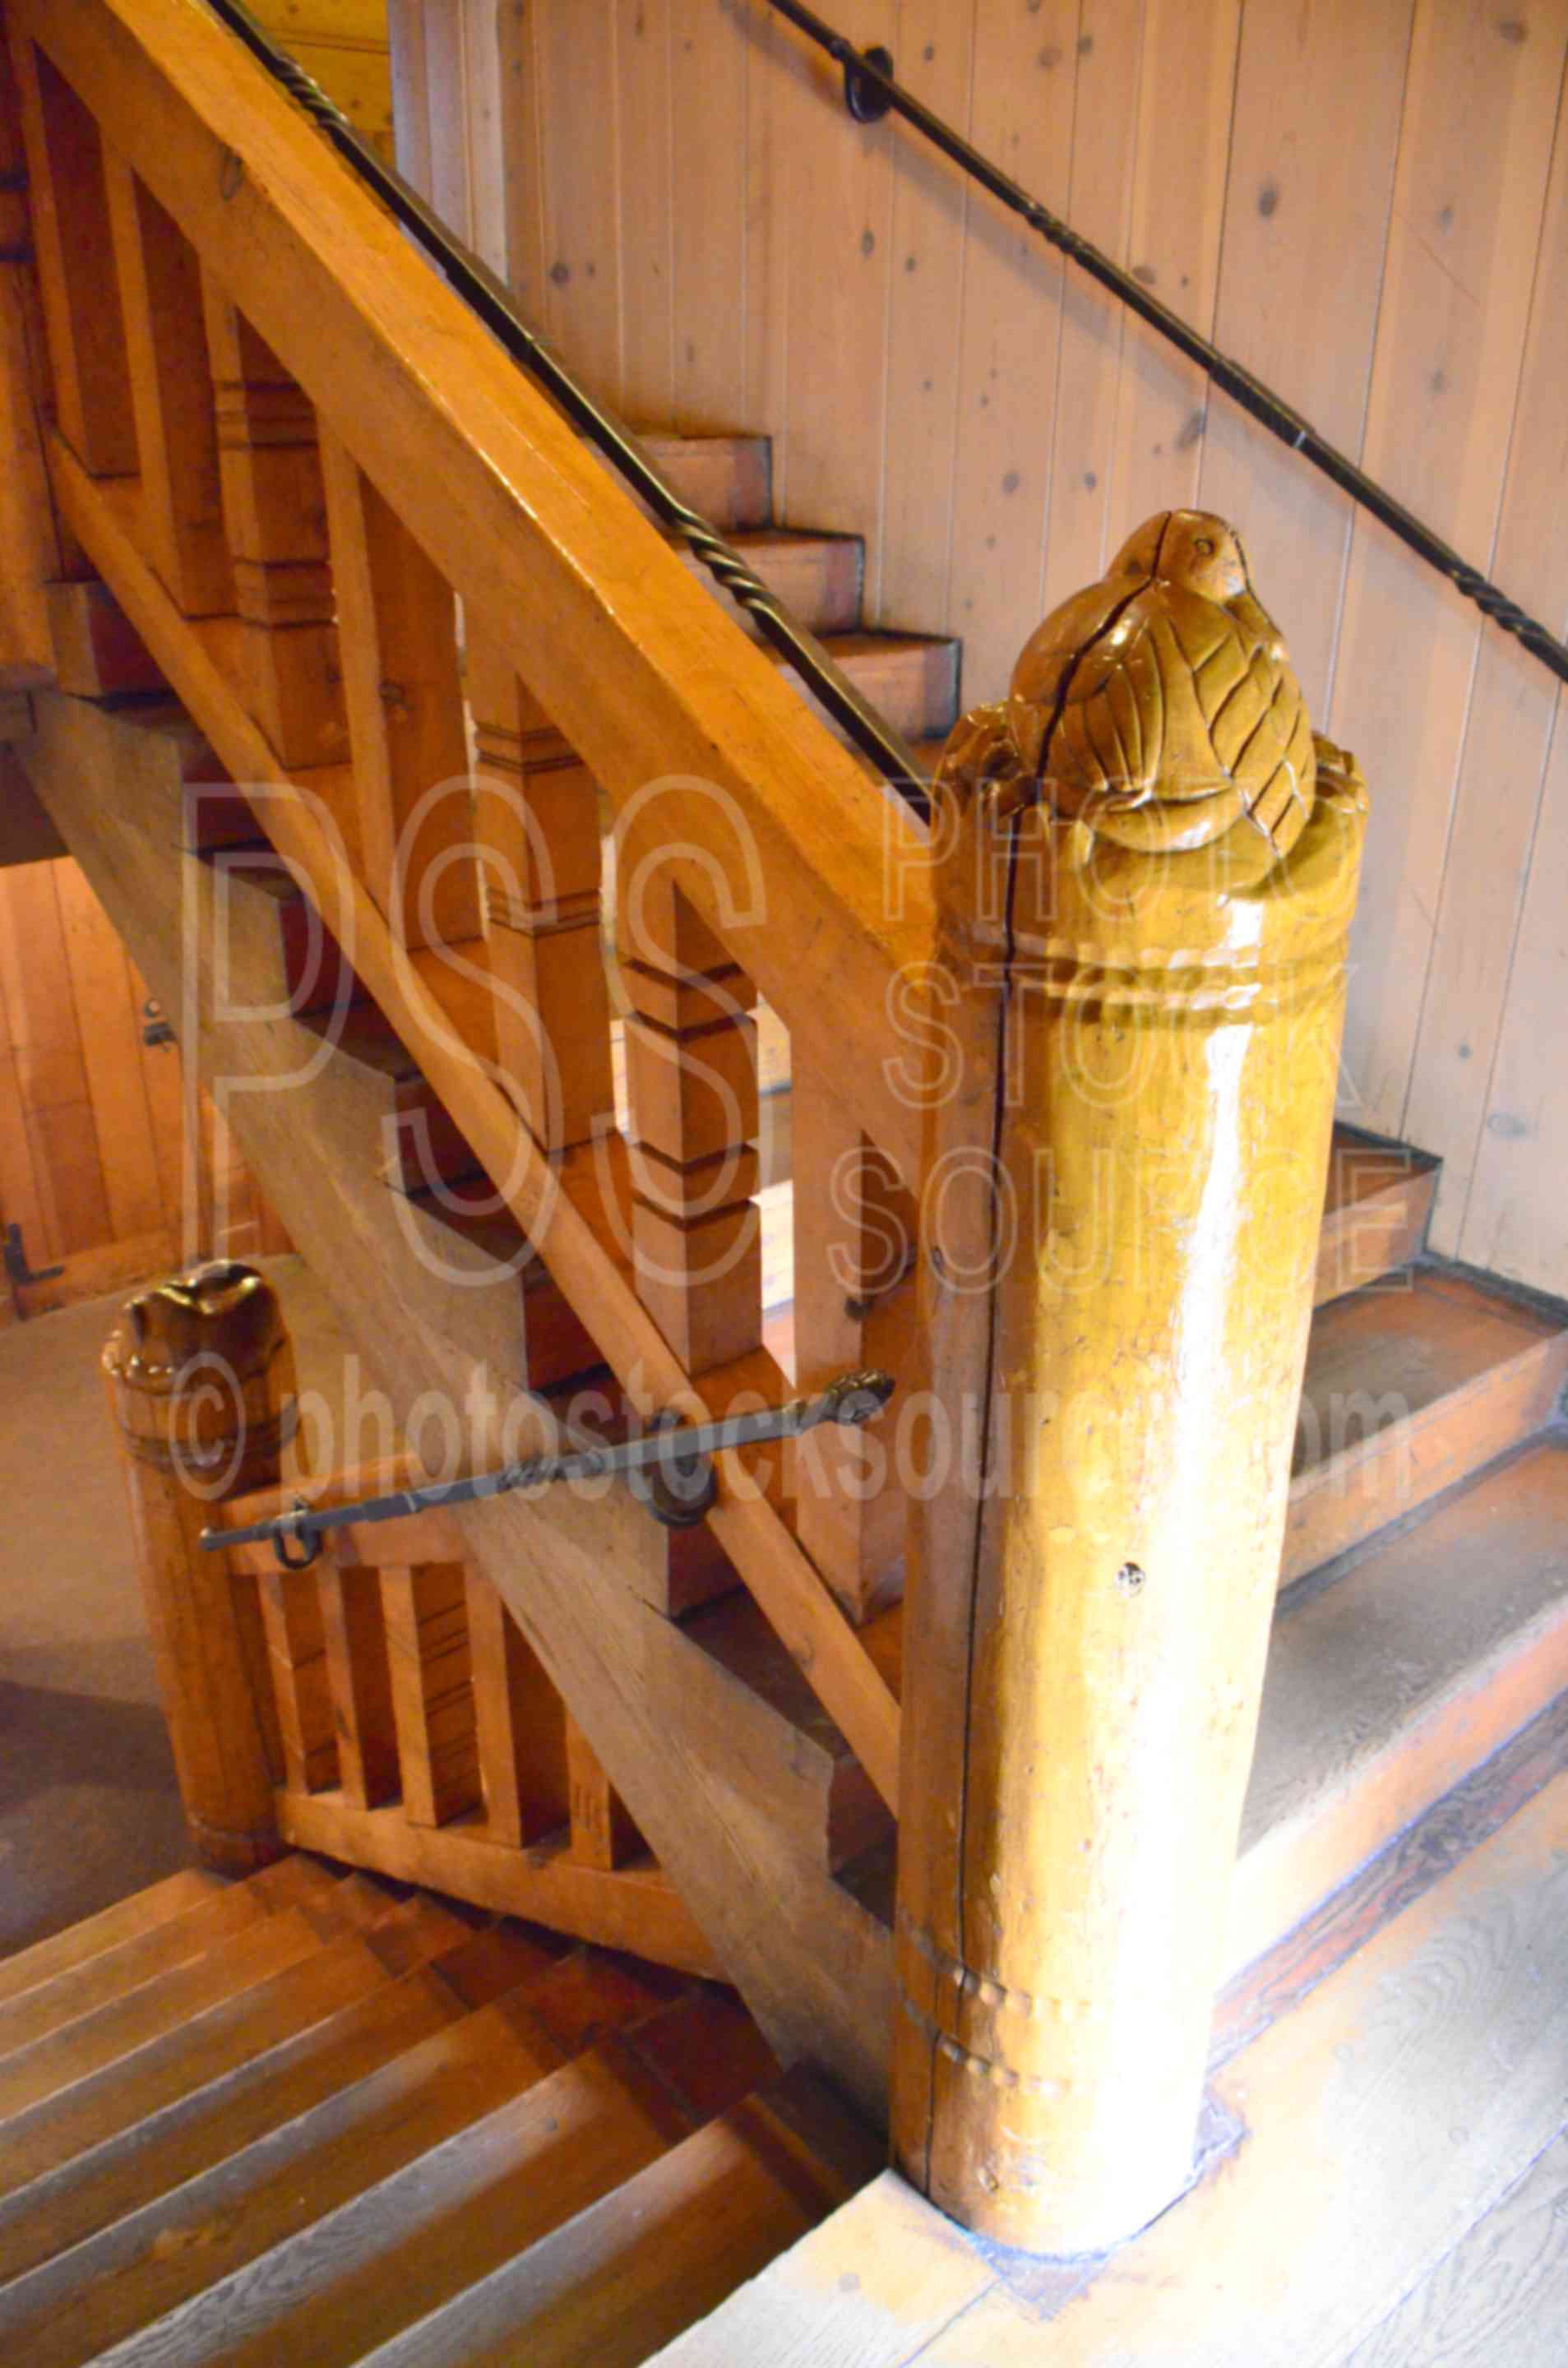 Carved Newel Post on Staircase,mt. hood,lodge,building,historic,historical,carved,newel,post,art,sculpture